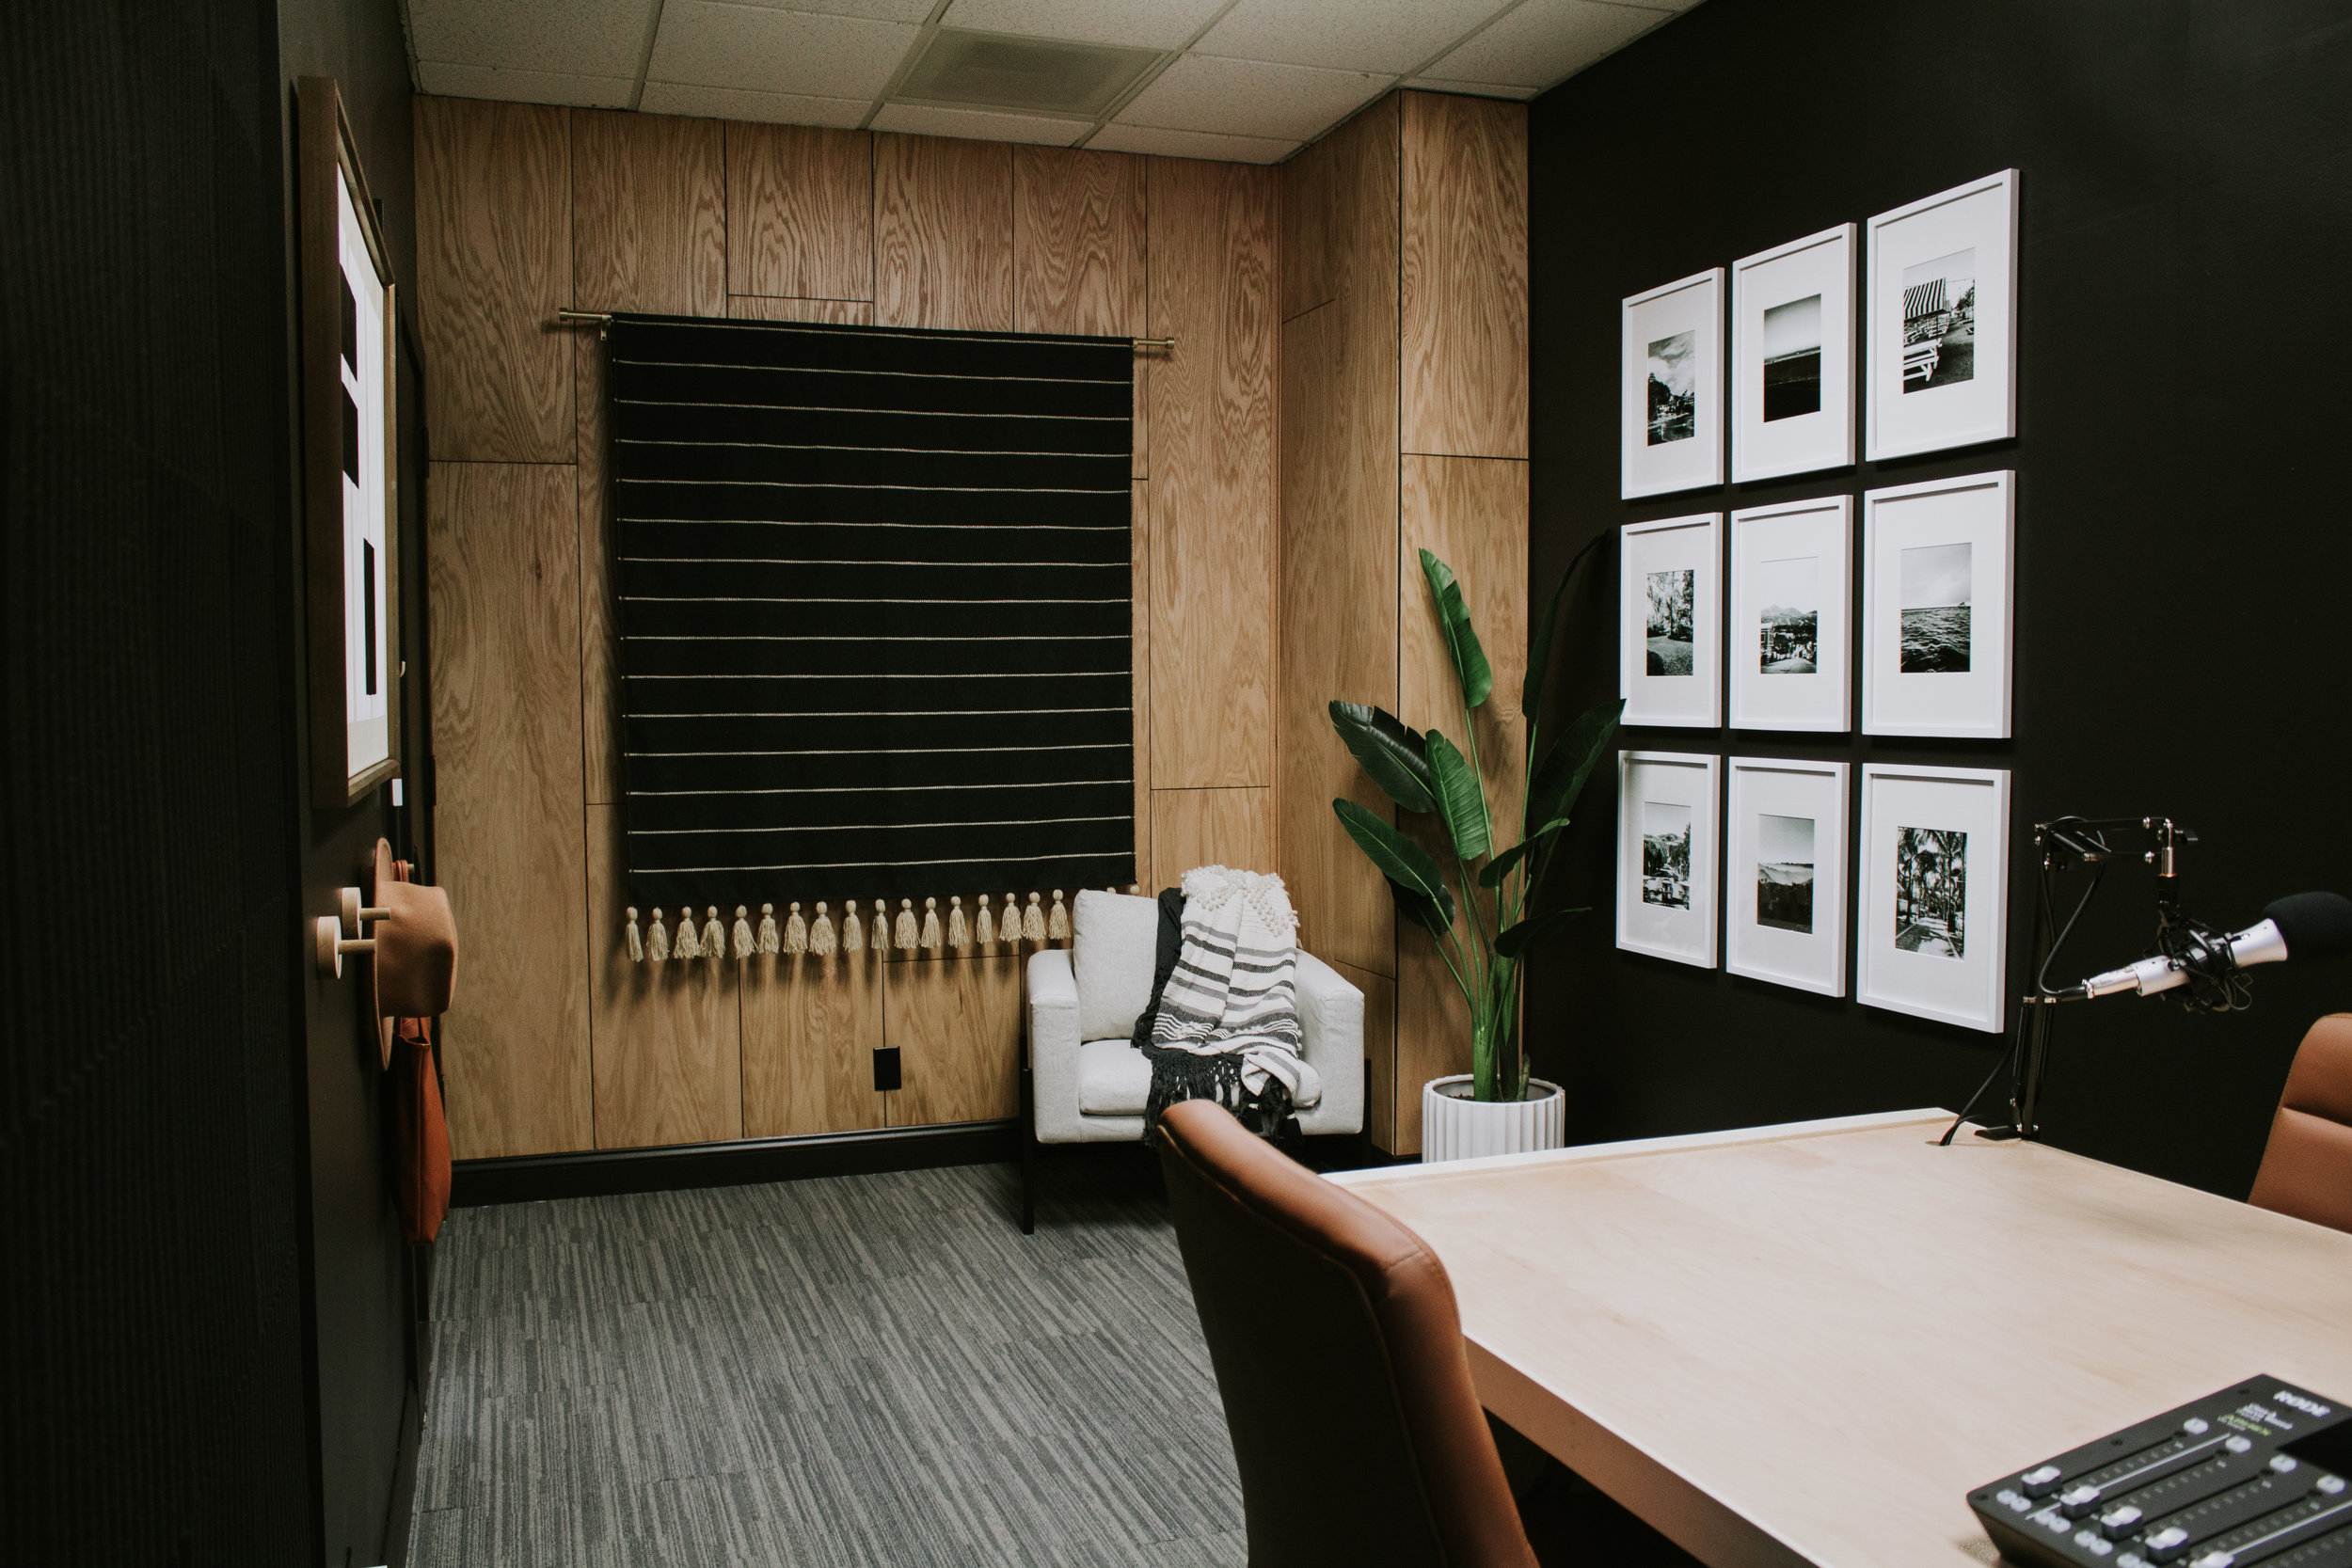 Speak Podcast Studio Reveal! Full transformation and makeover by Nadine Stay. Speak Podcast Studio is located in Lincoln, Nebraska. A podcast recording studio. Modern & moody office makeover with black walls, oak wood accent wall, and modern artwork…